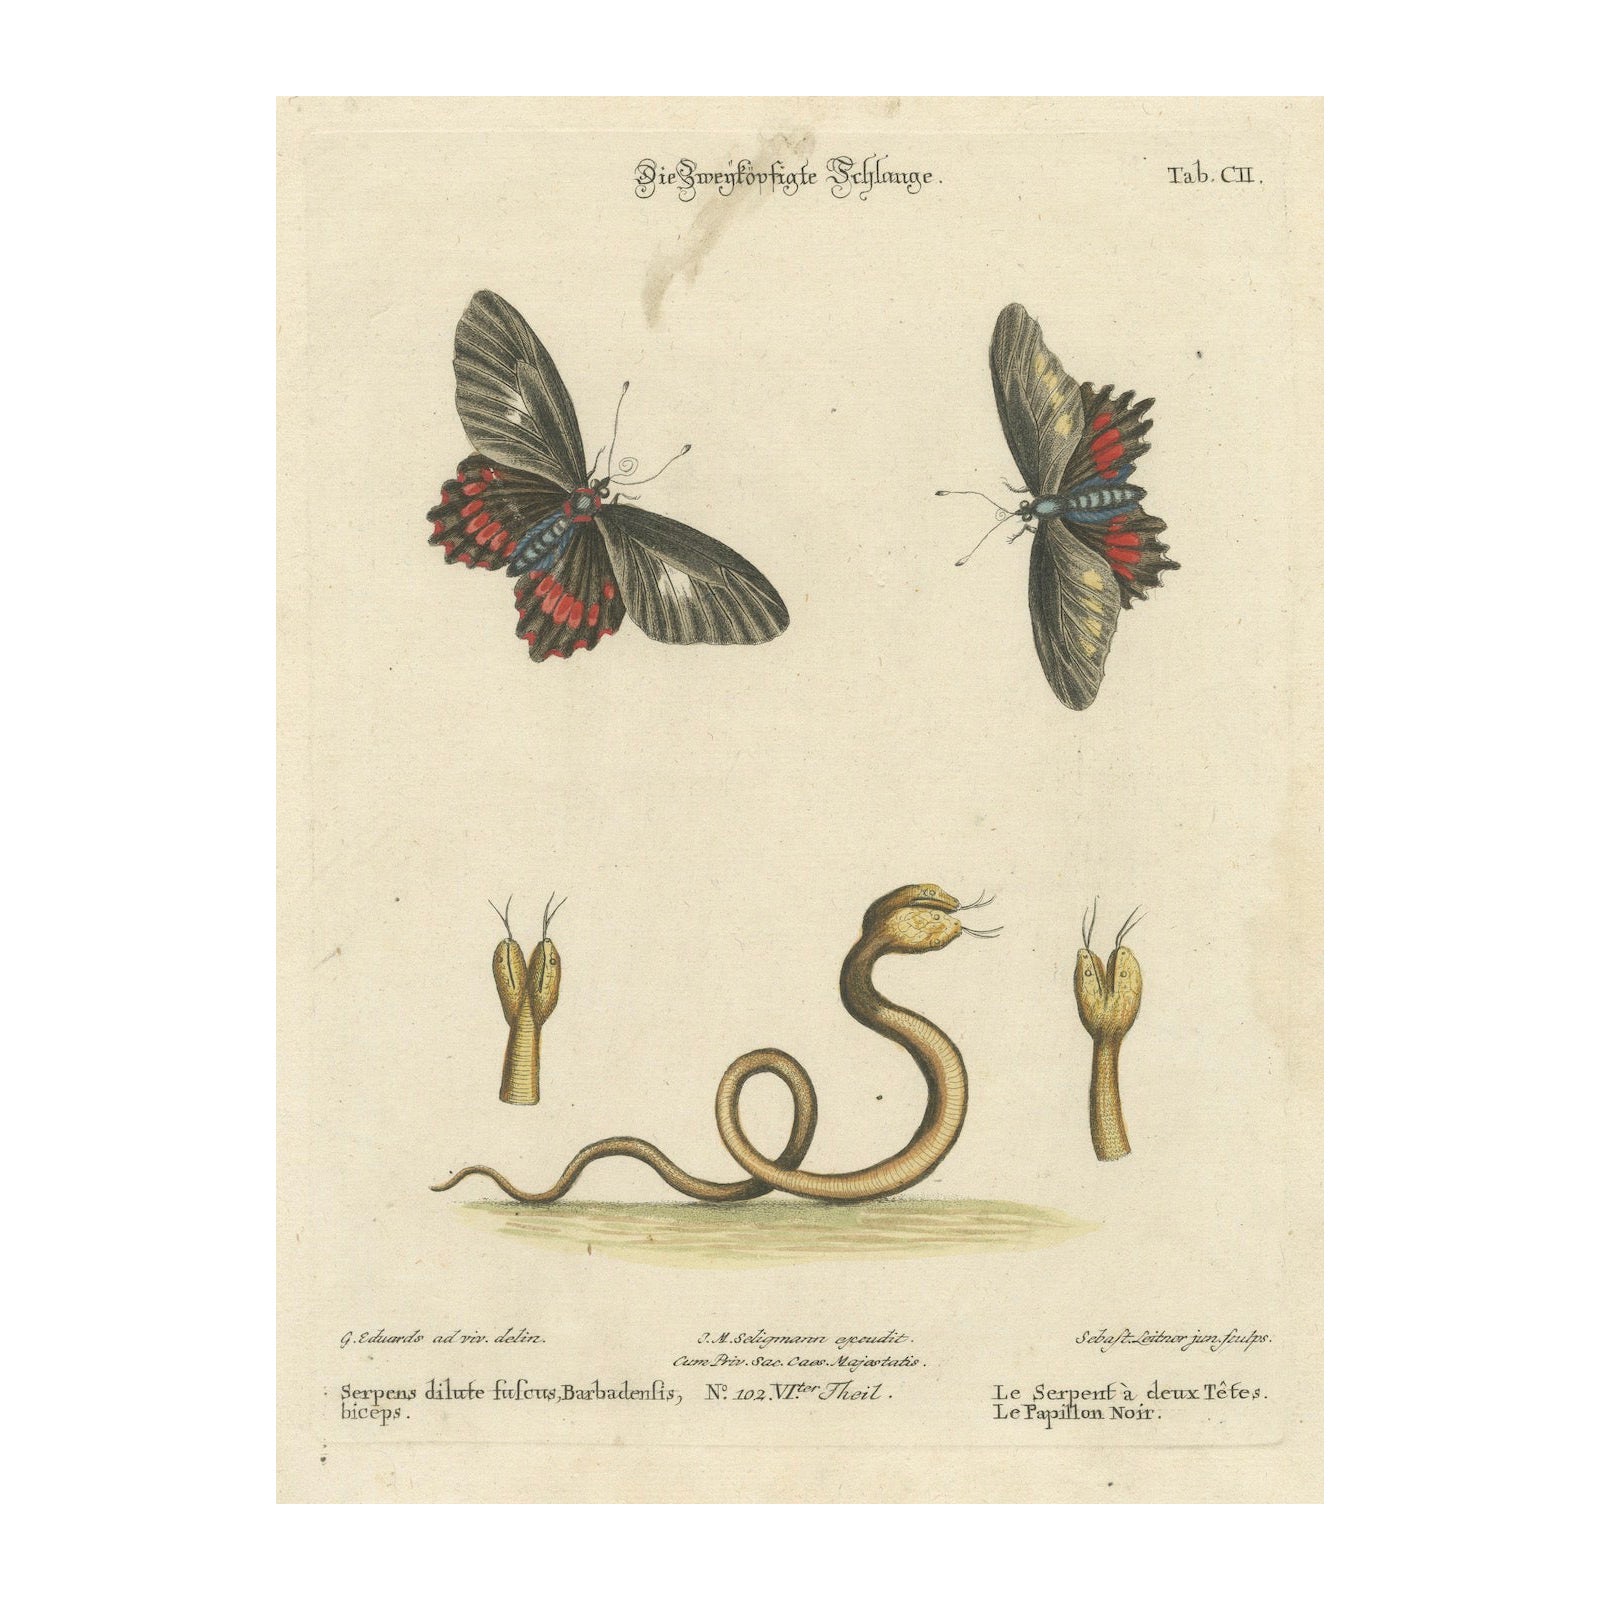 The Two-Headed Serpent and the Black Butterfly, 1749